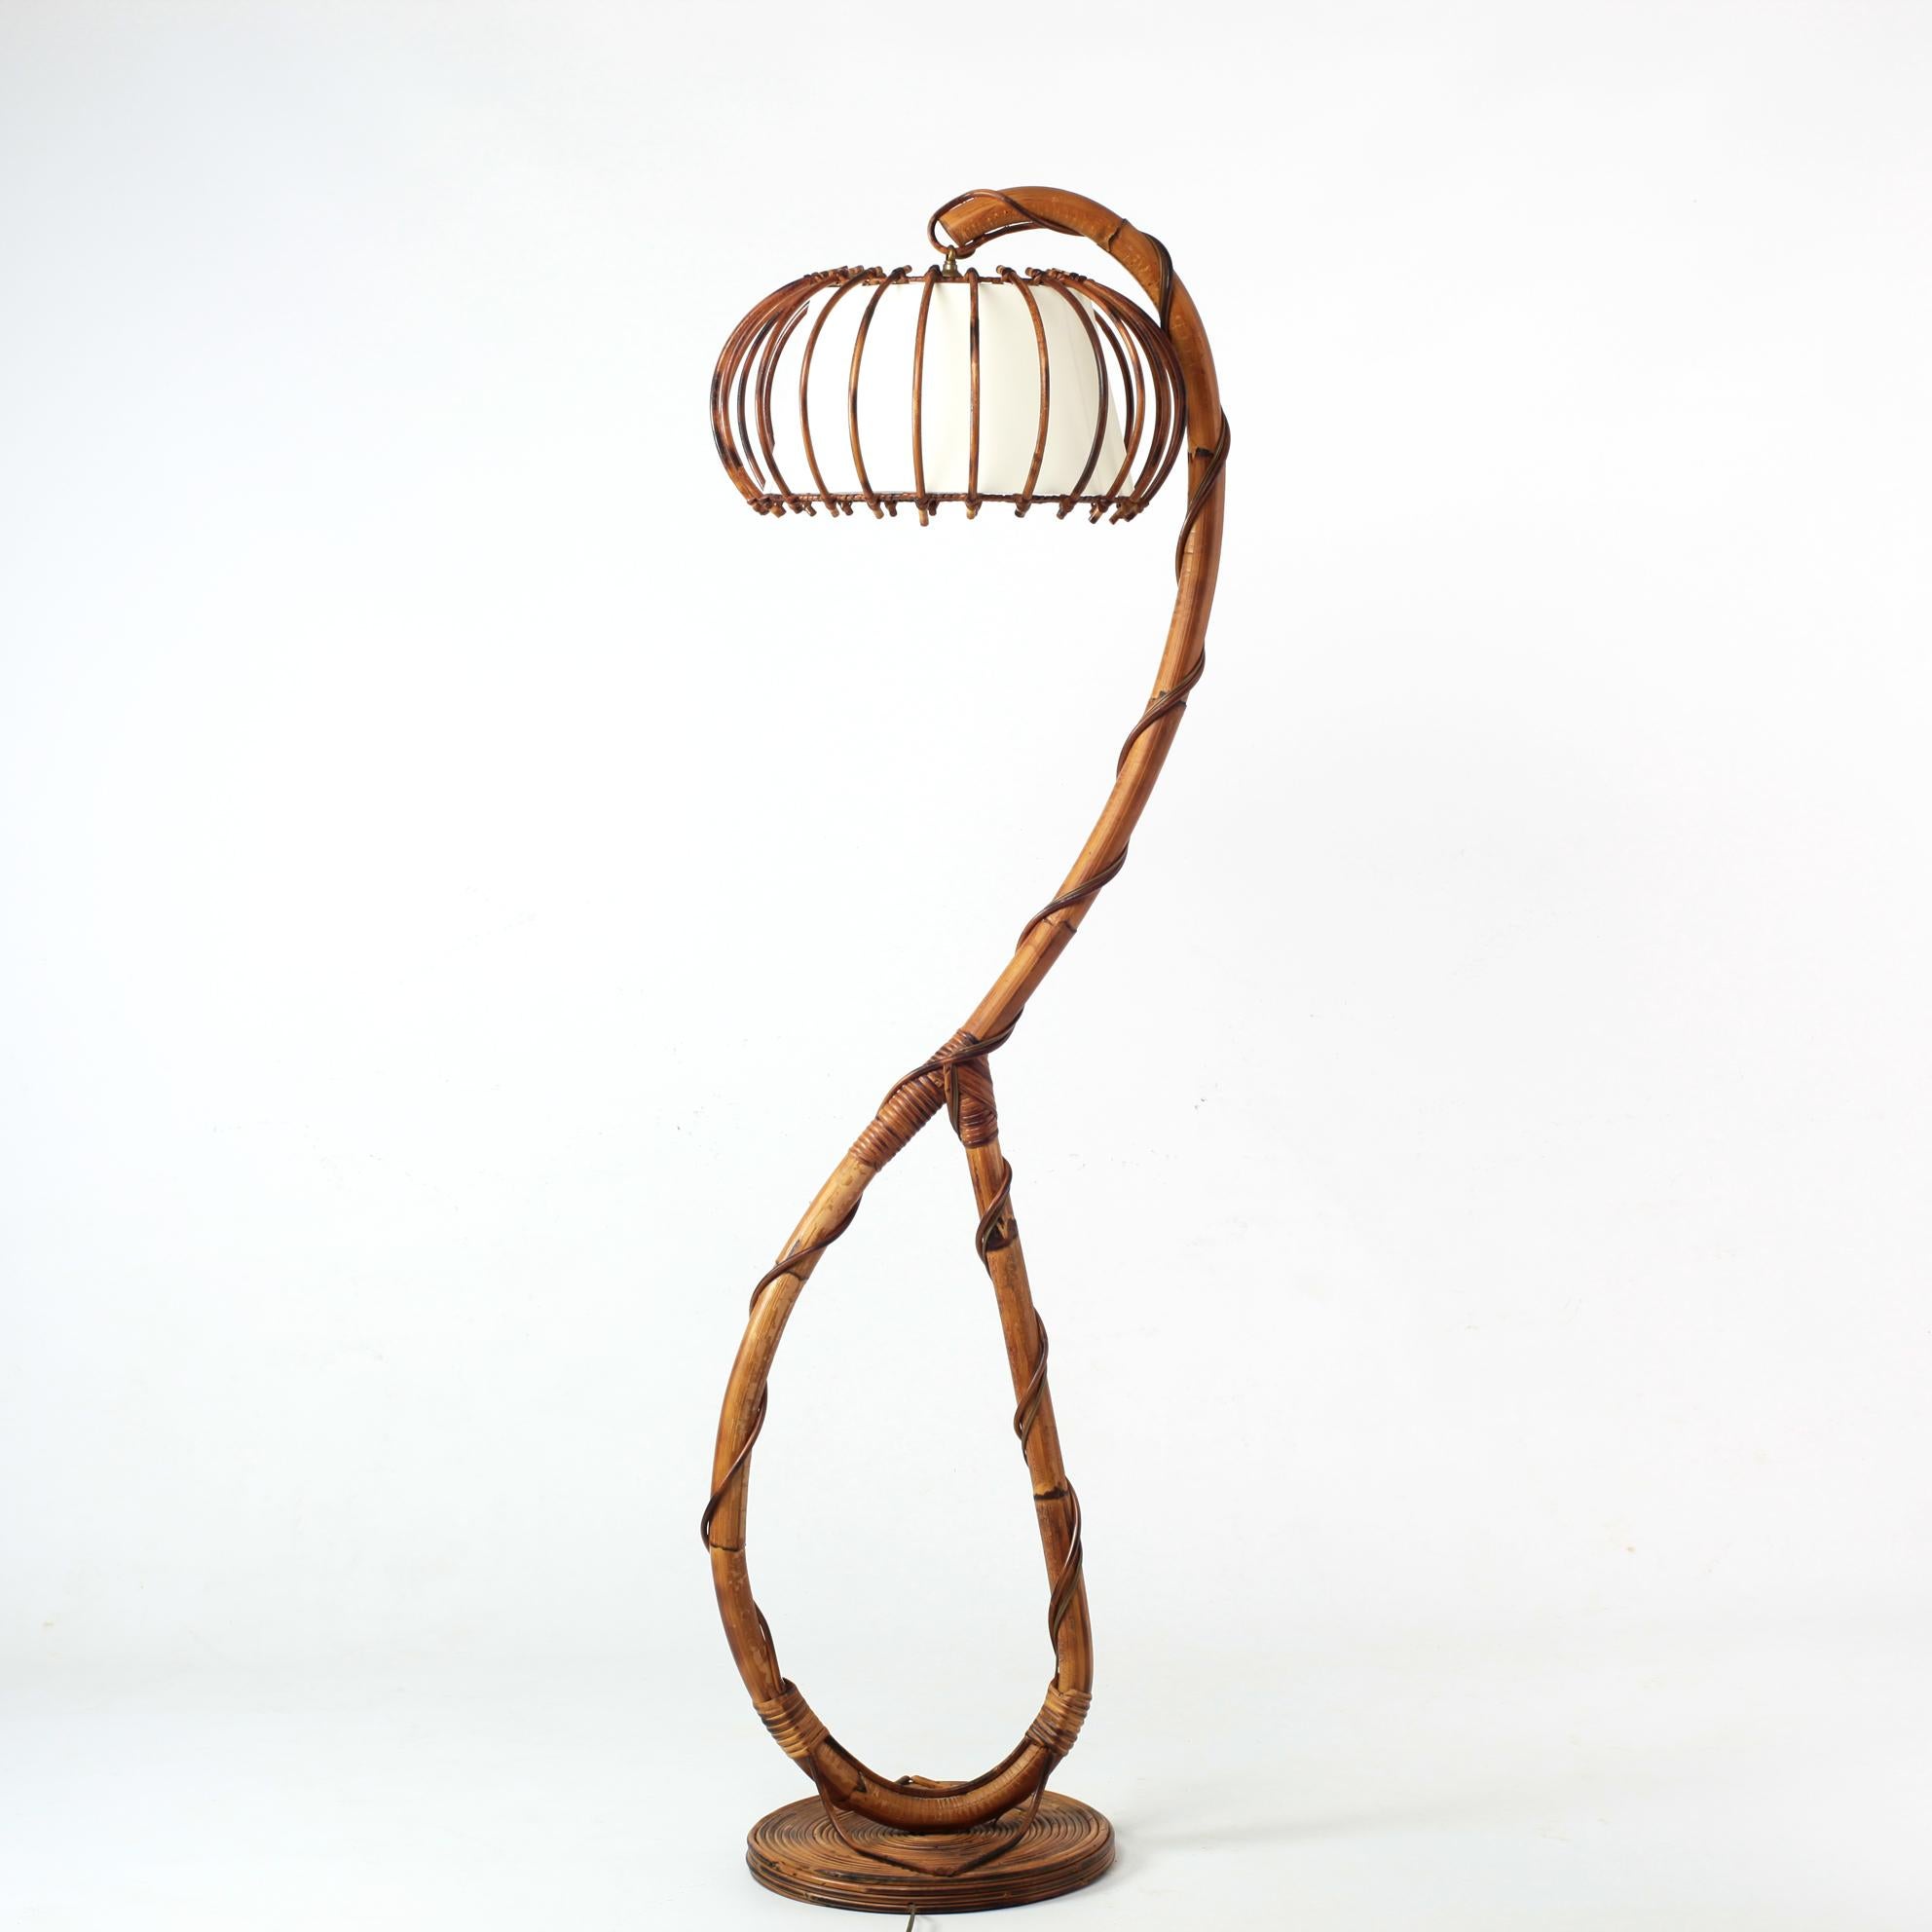 Sculptural french bambou and rattan floor lamp from 1960's
New shade
Nice warm patina
B22 socket.